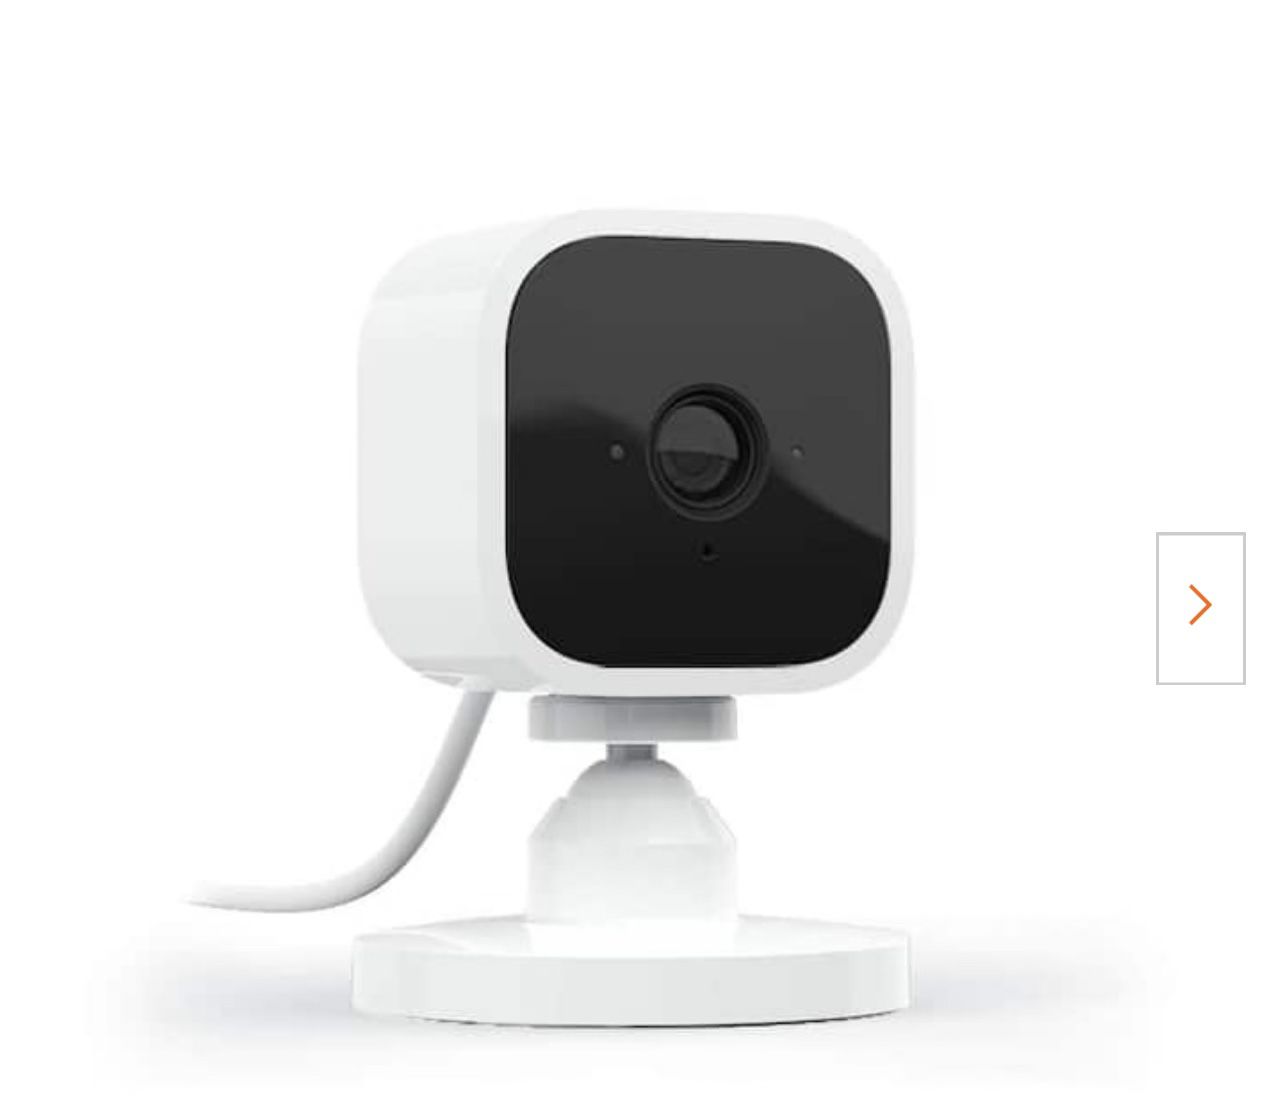 Blink Mini Indoor Wired 1080p Wi-Fi Security Camera in White